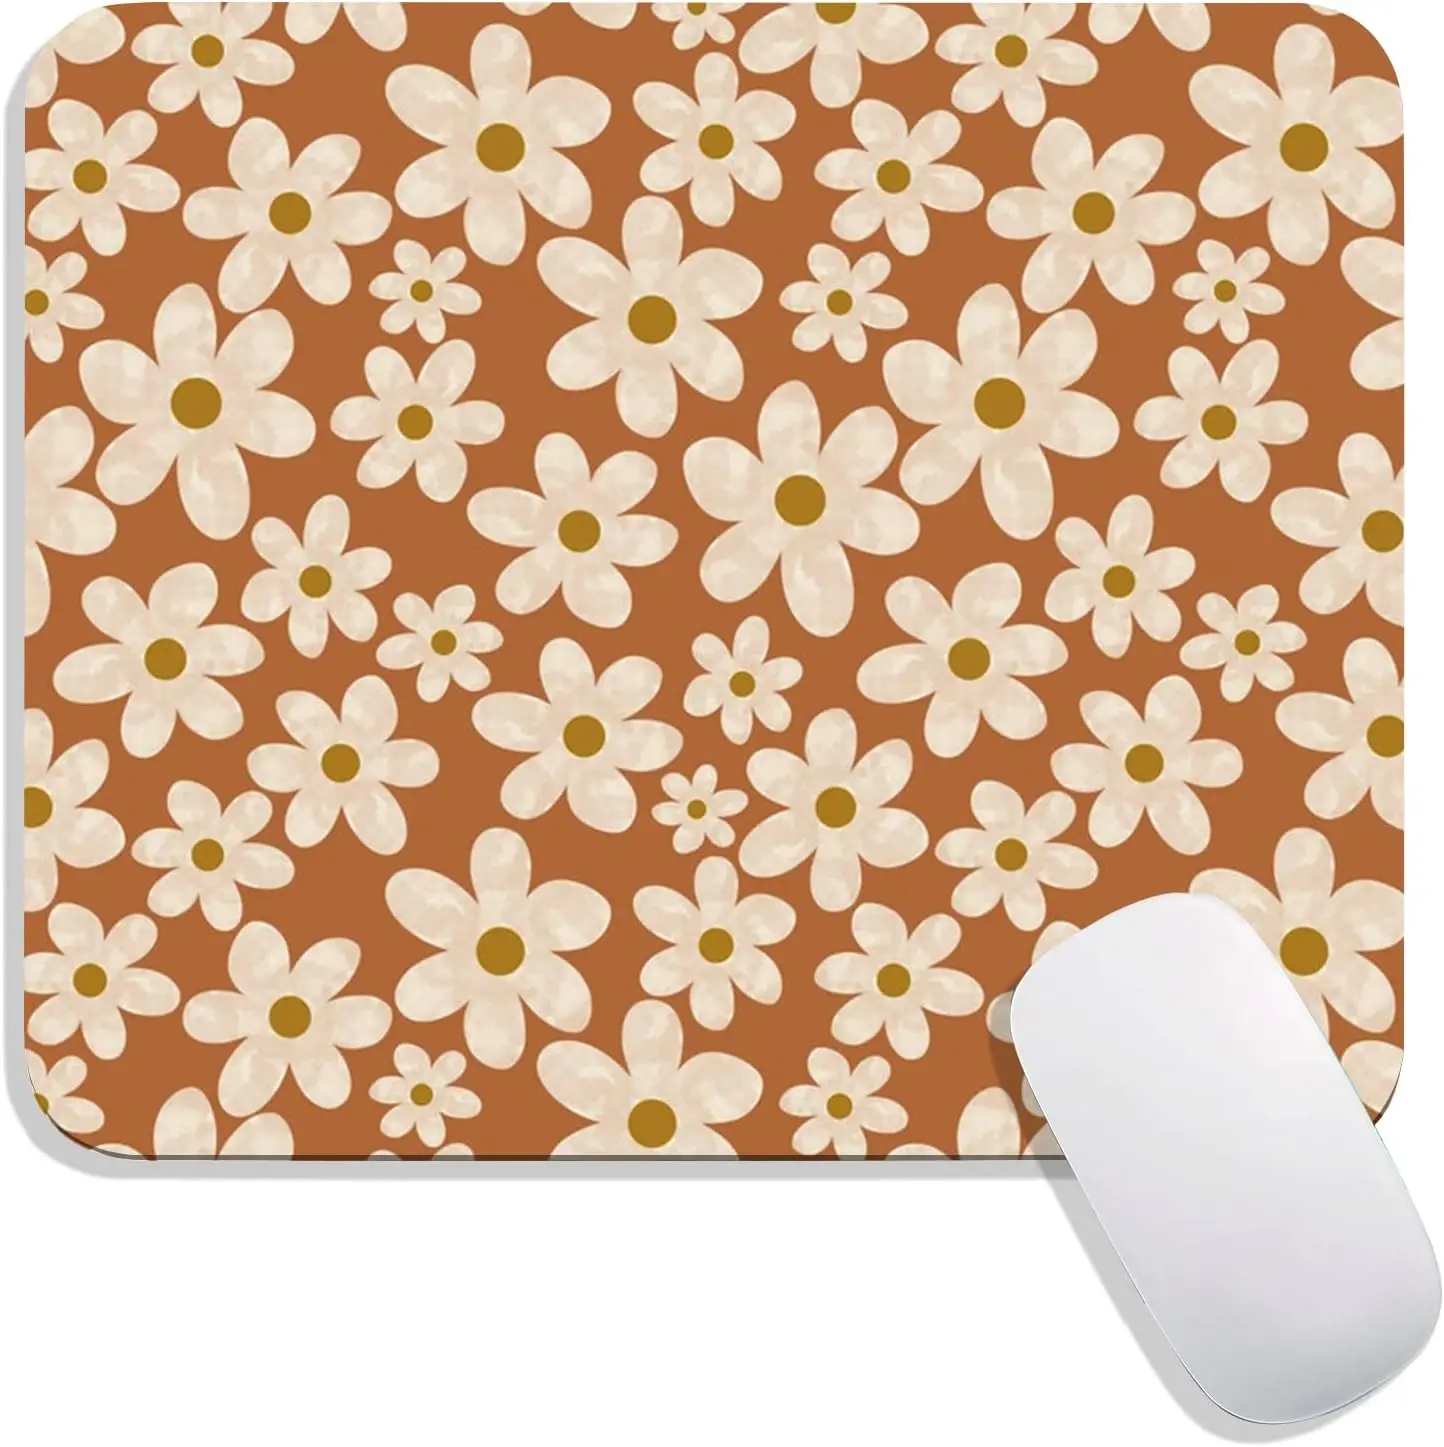 

Pretty Flower Floral Mouse Pad Personalized Premium-Textured Mousepads Design Non-Slip Rubber Base Computer Mouse Pads 9.7x7.9In